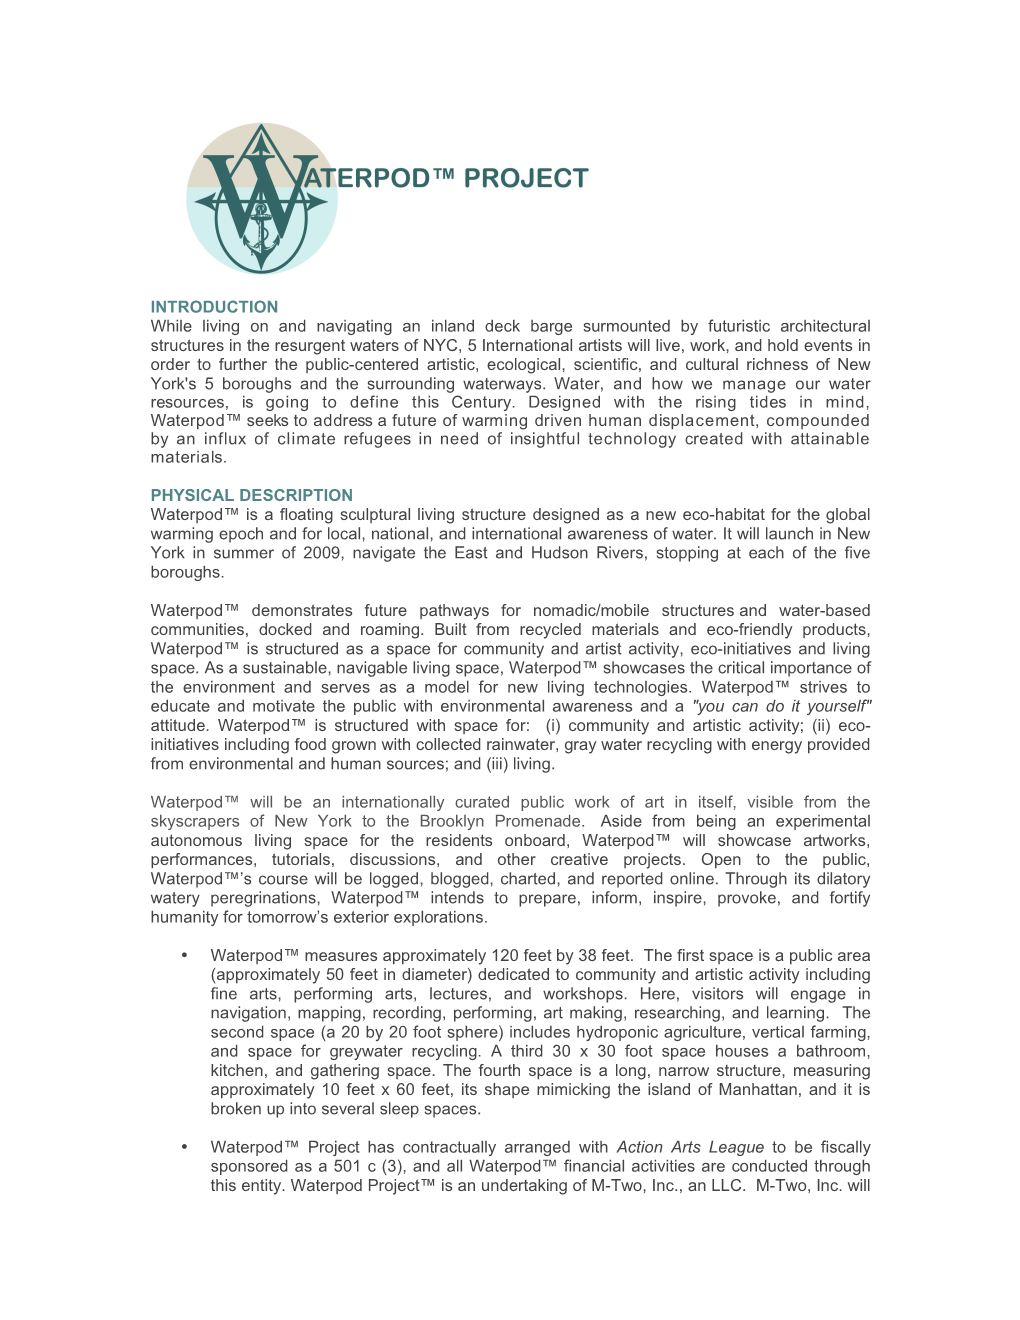 Our 2009 WATERPOD™ PRESS RELEASE Is Available to Download